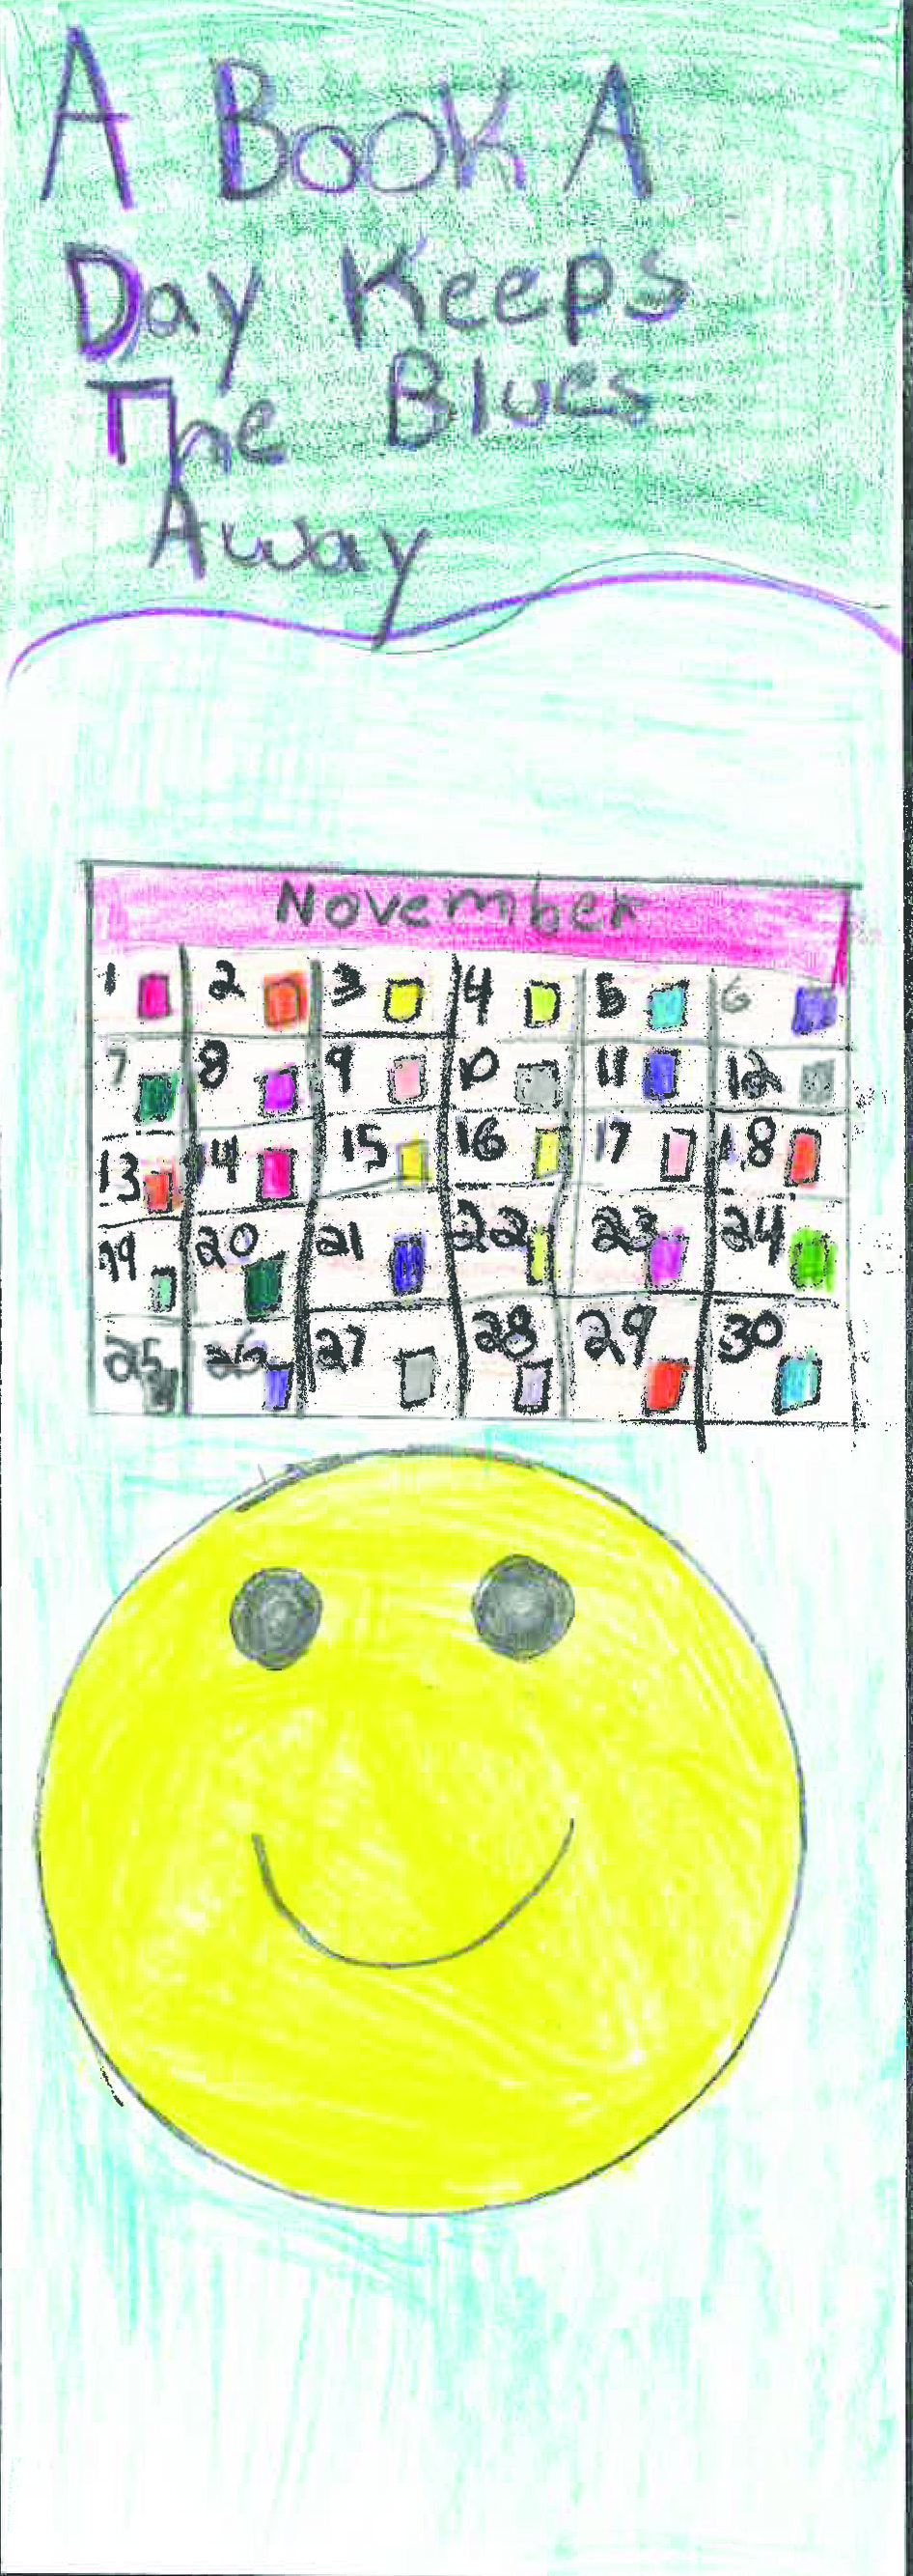 November 2020 bookmark contest winner showing a calendar and smiley face with the words, "A book a day keeps the blues away"